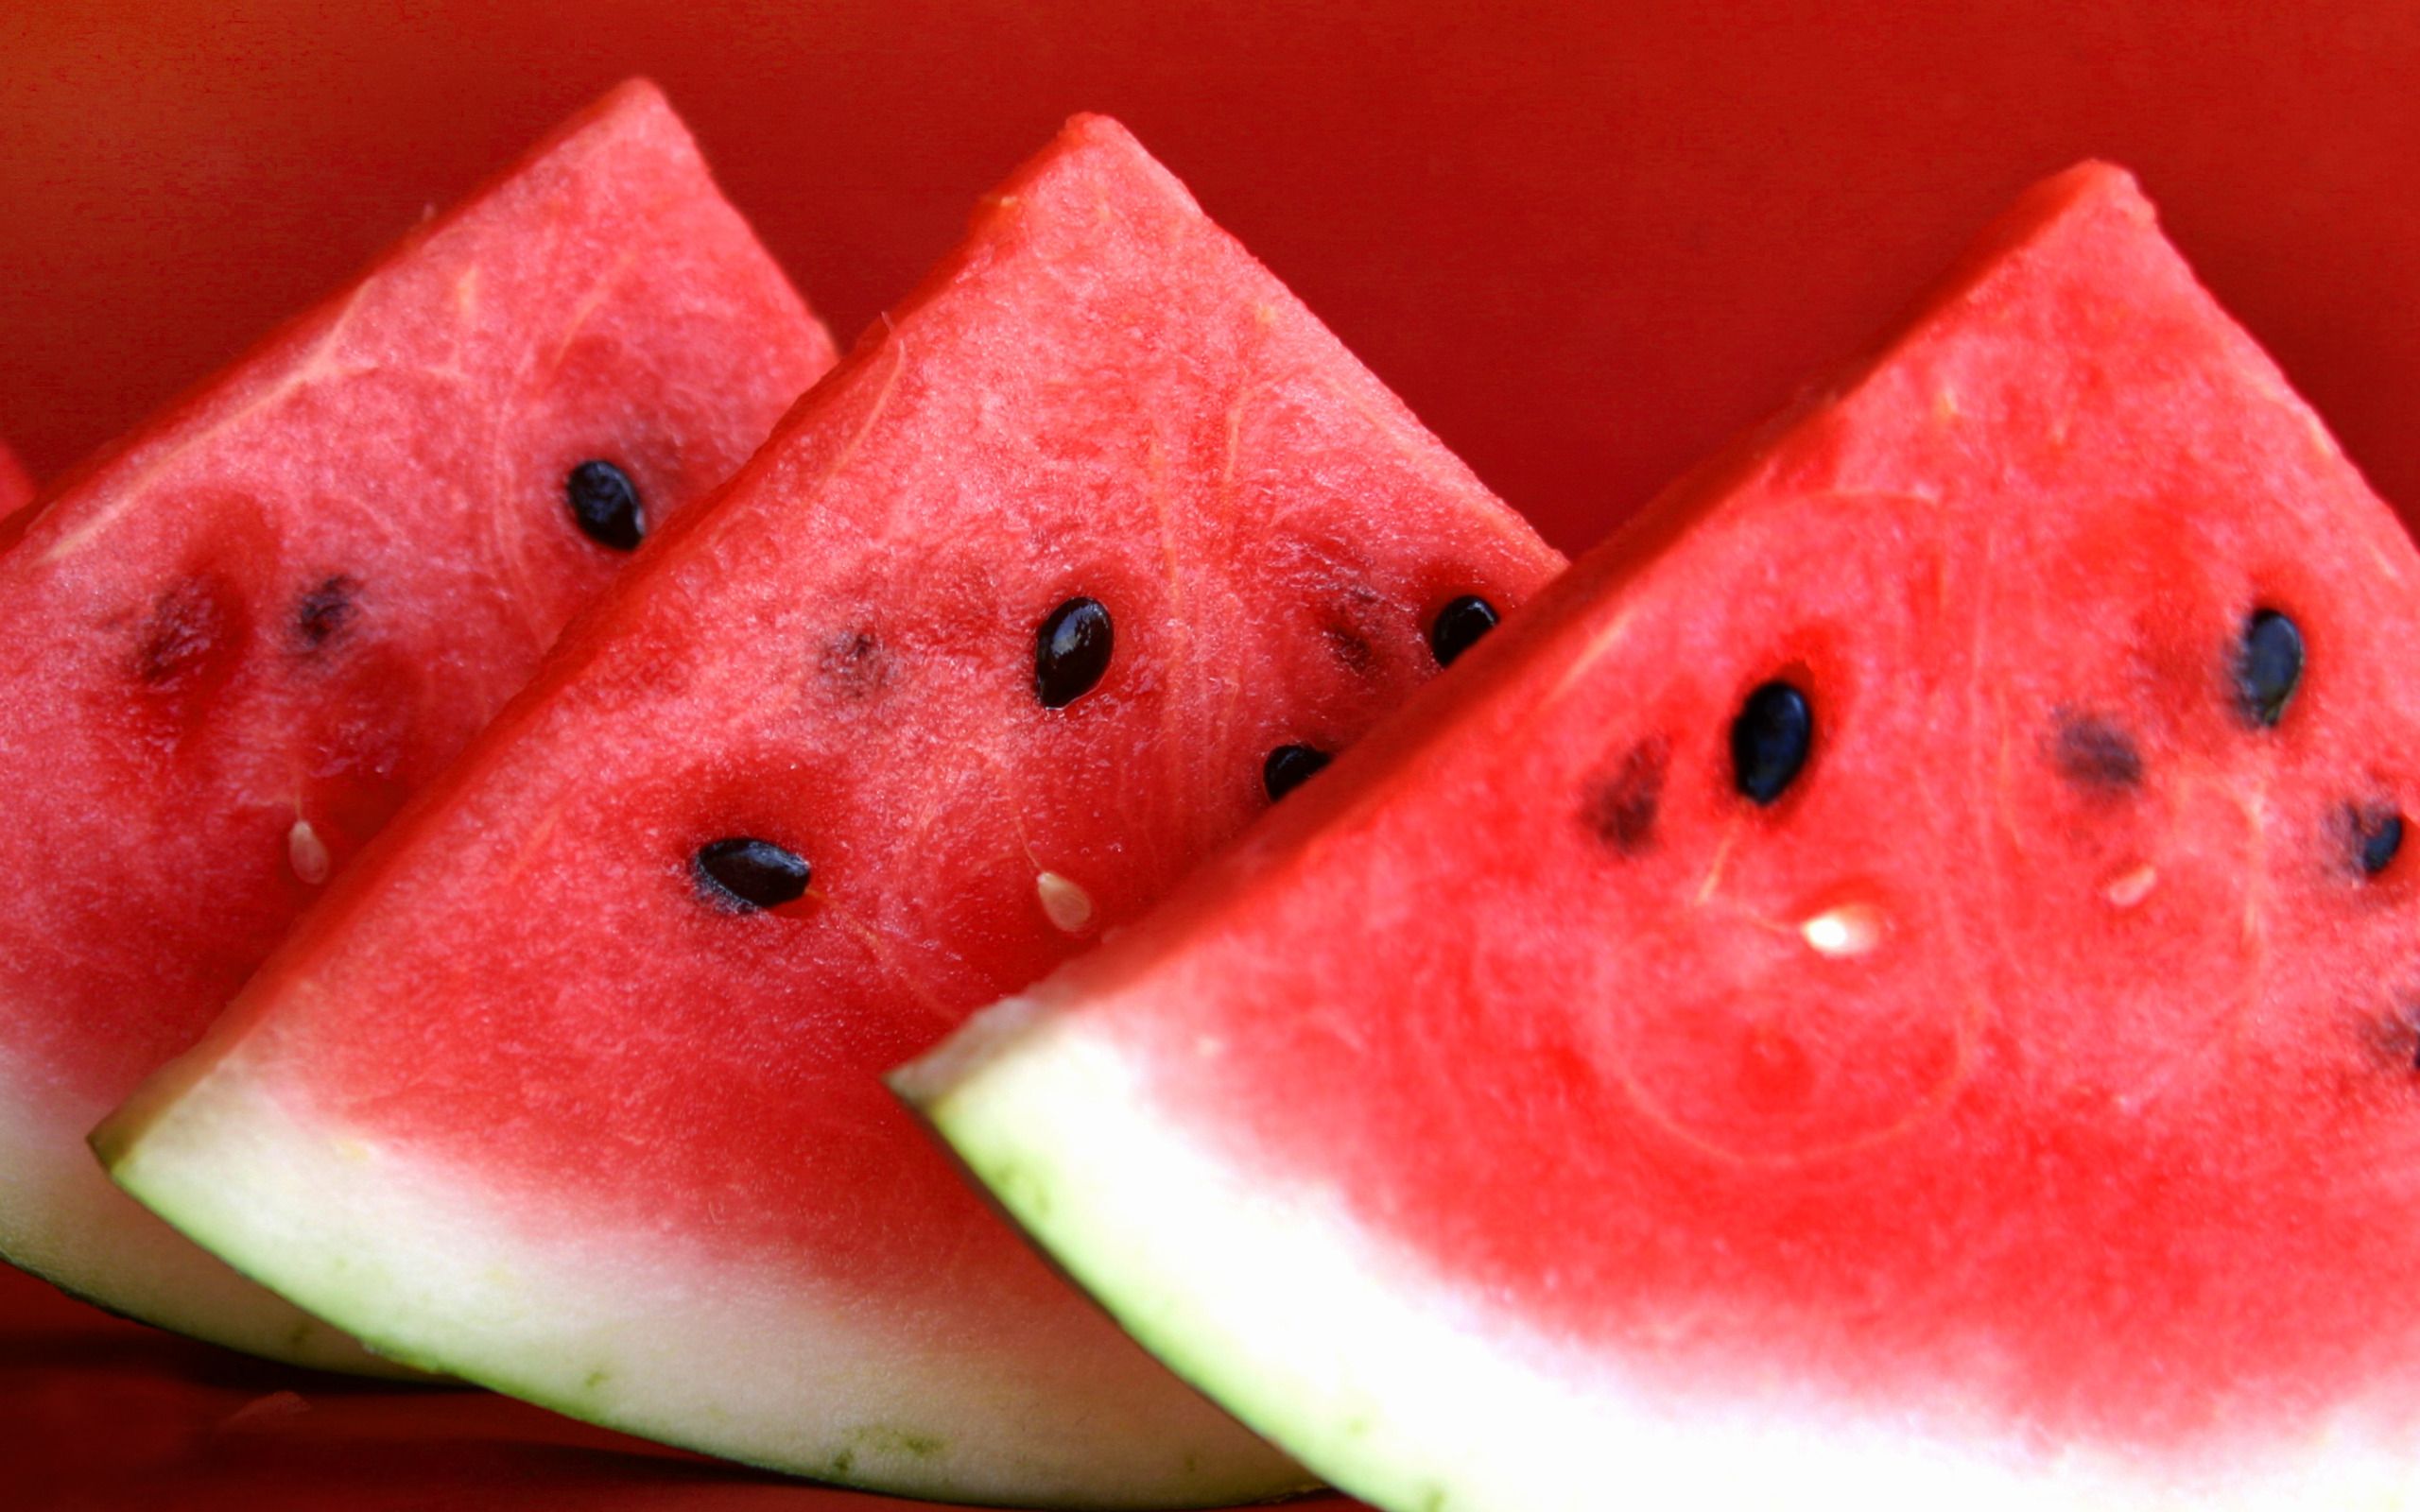 Slices of watermelon wallpaper. Slices of watermelon